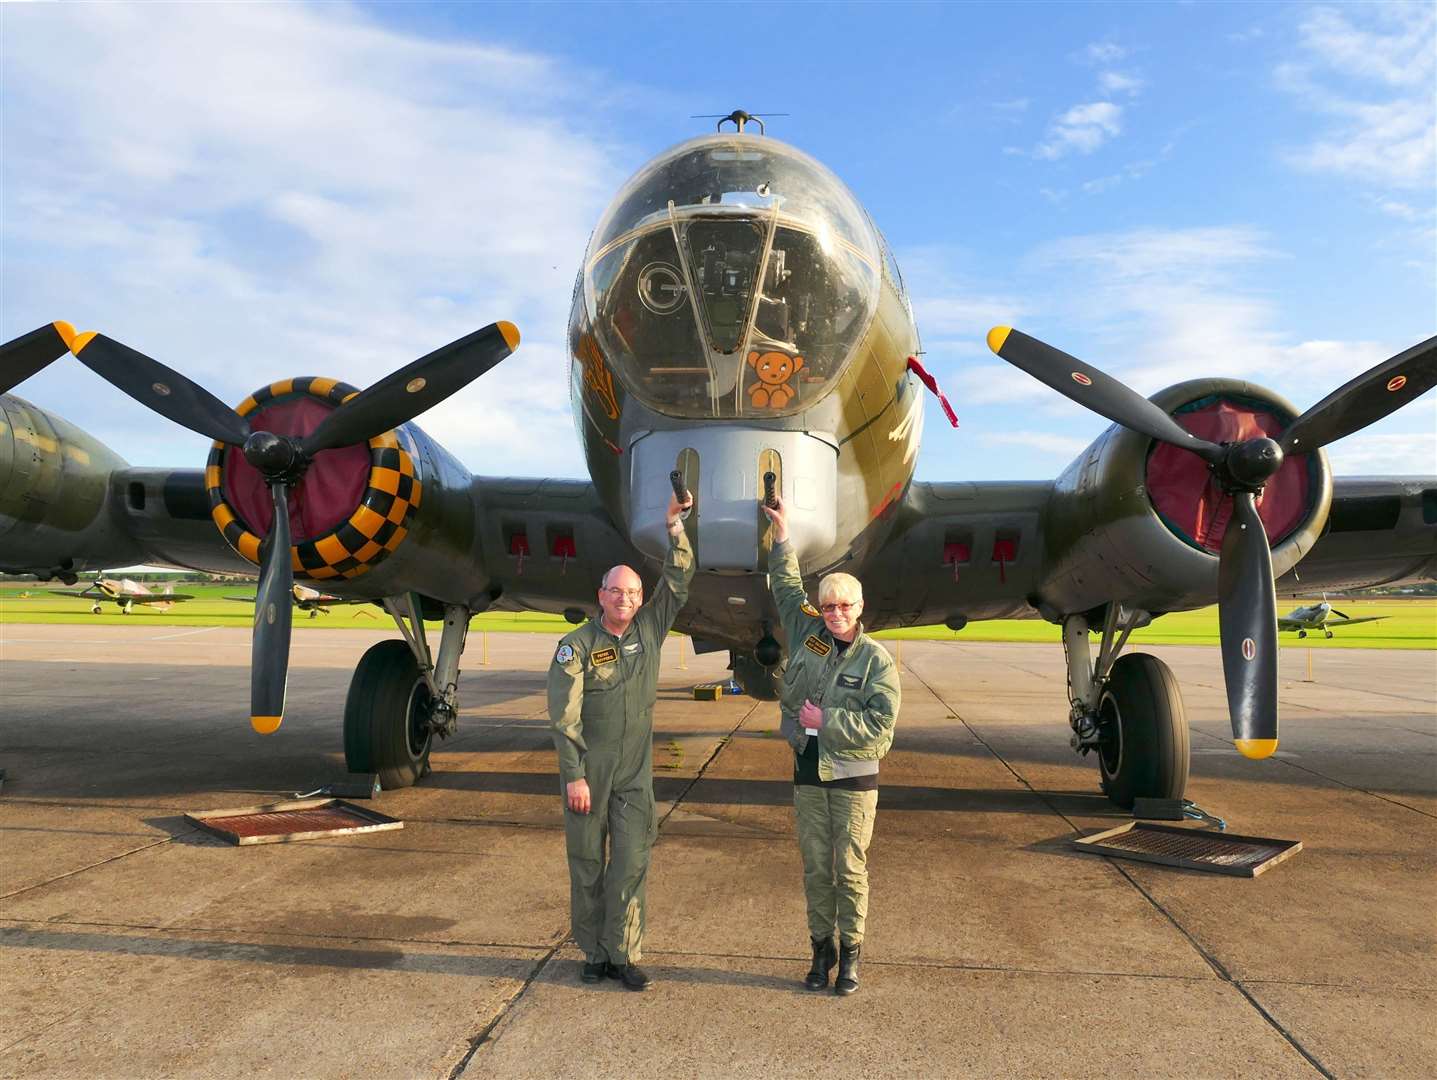 Elly Sallingboe with Captain Peter Kuypers and the Sally B B-17 Flying Fortress. Image submitted by Elly Sallingboe